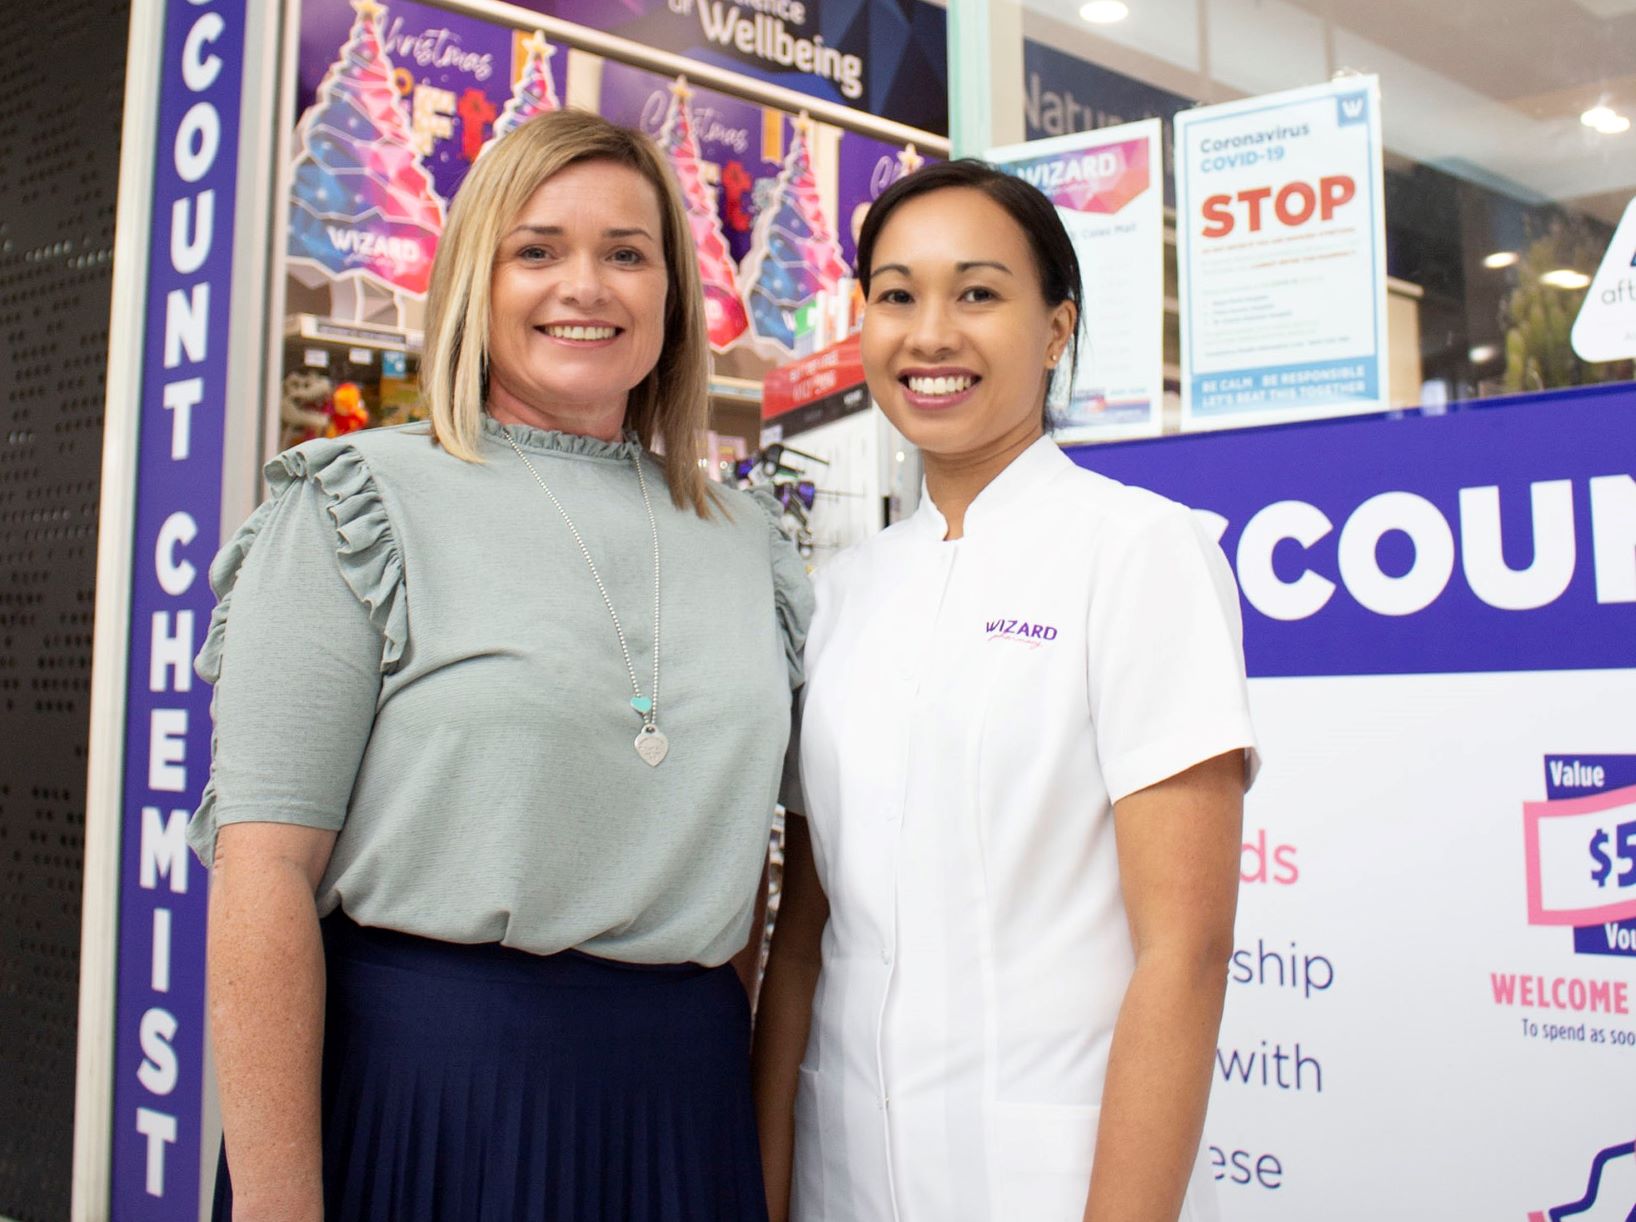 Wizard Pharmacy COO Sally Parker with Wizard Pharmacy Pharmacist and Franchisee Jeanette Drury